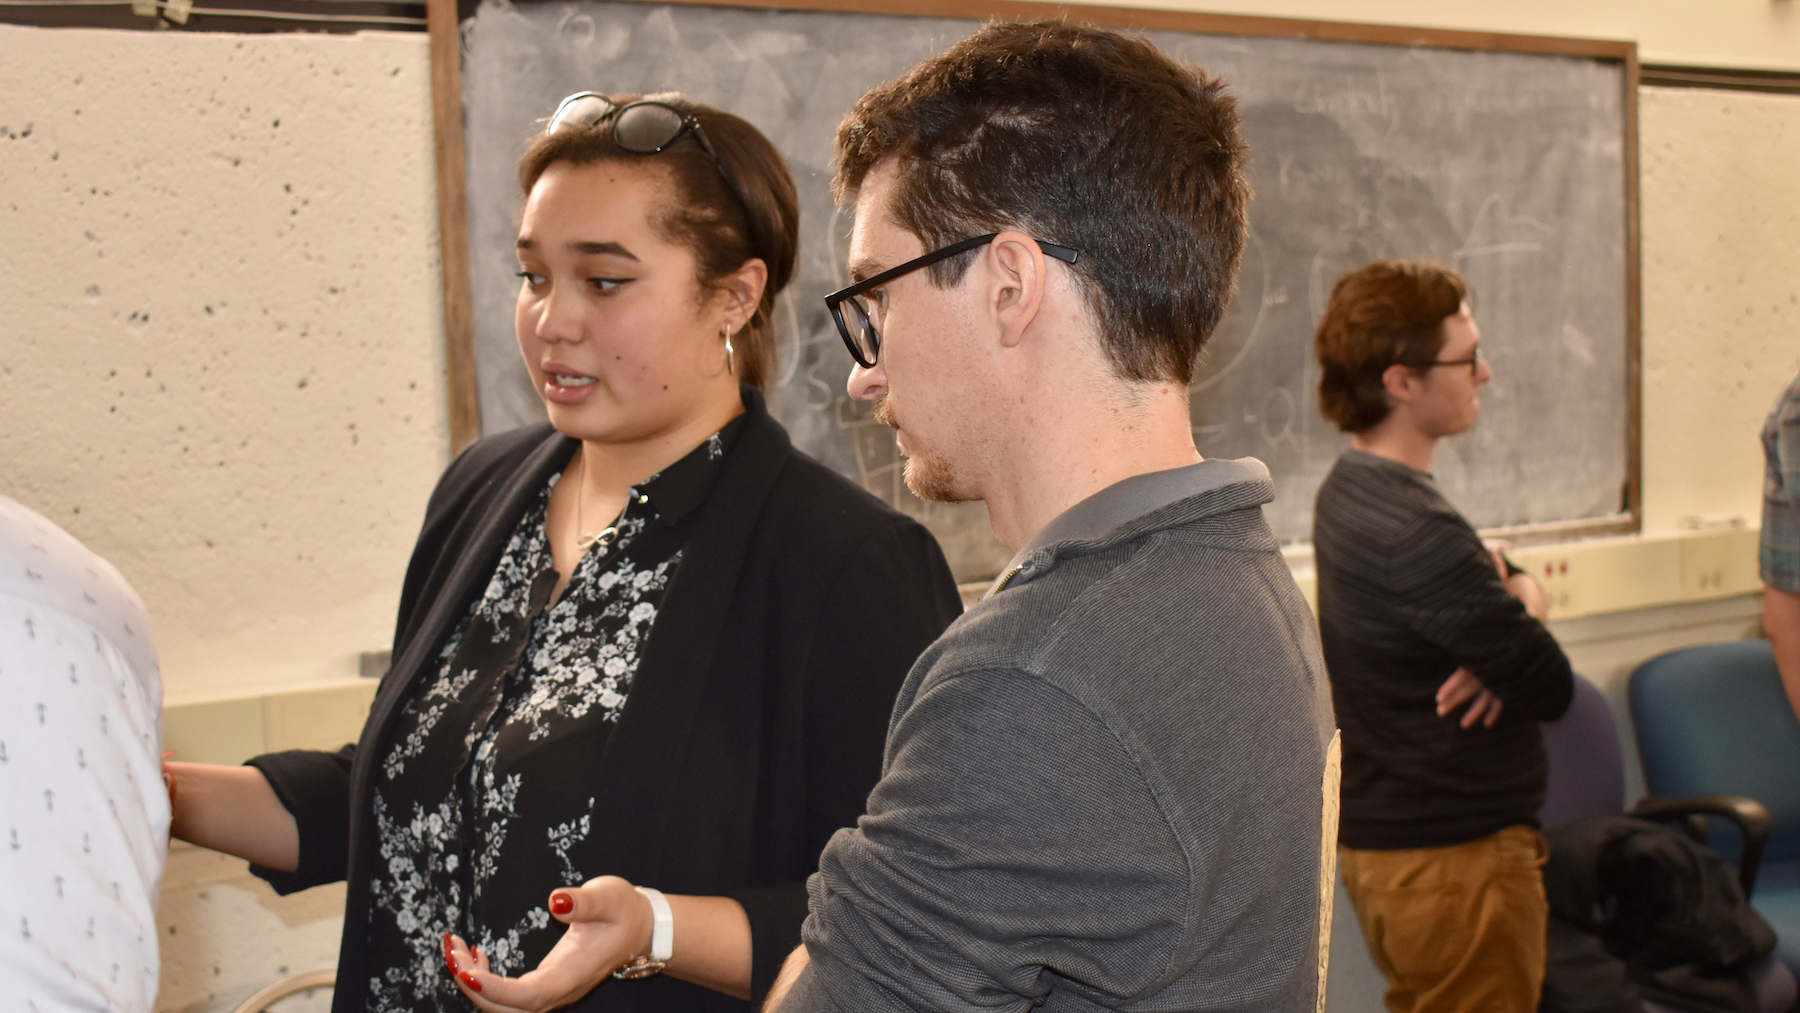 Linguistics major Inna Llanos, in profile, talking with PhD student Adam Liter about her research project